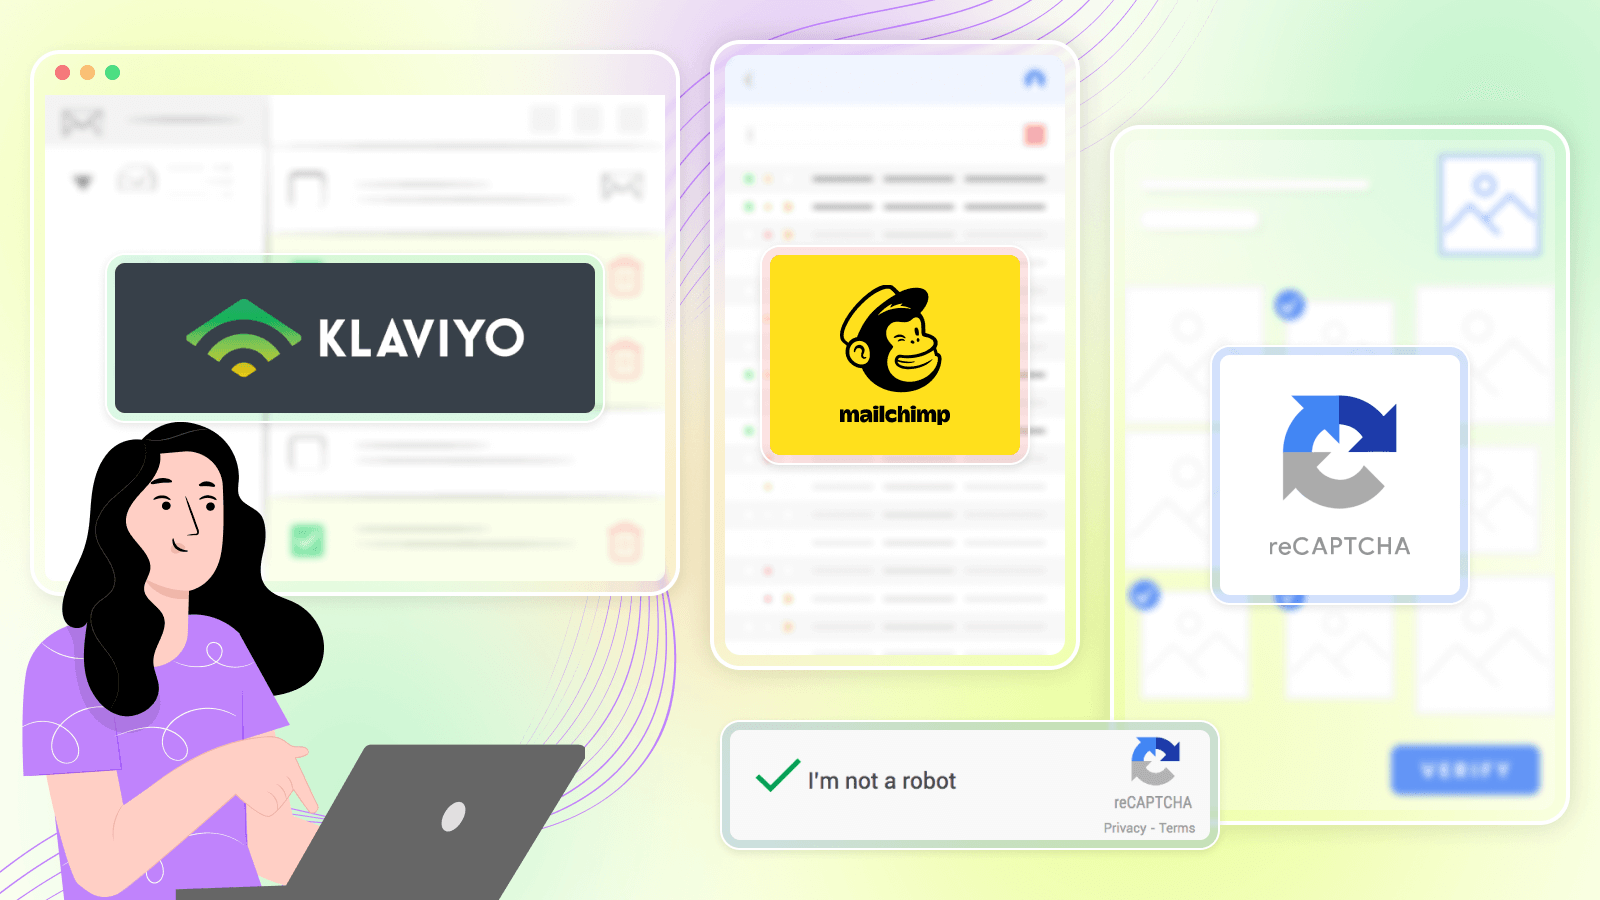 Supported with mailchimp, klaviyo and Google Recaptcha.